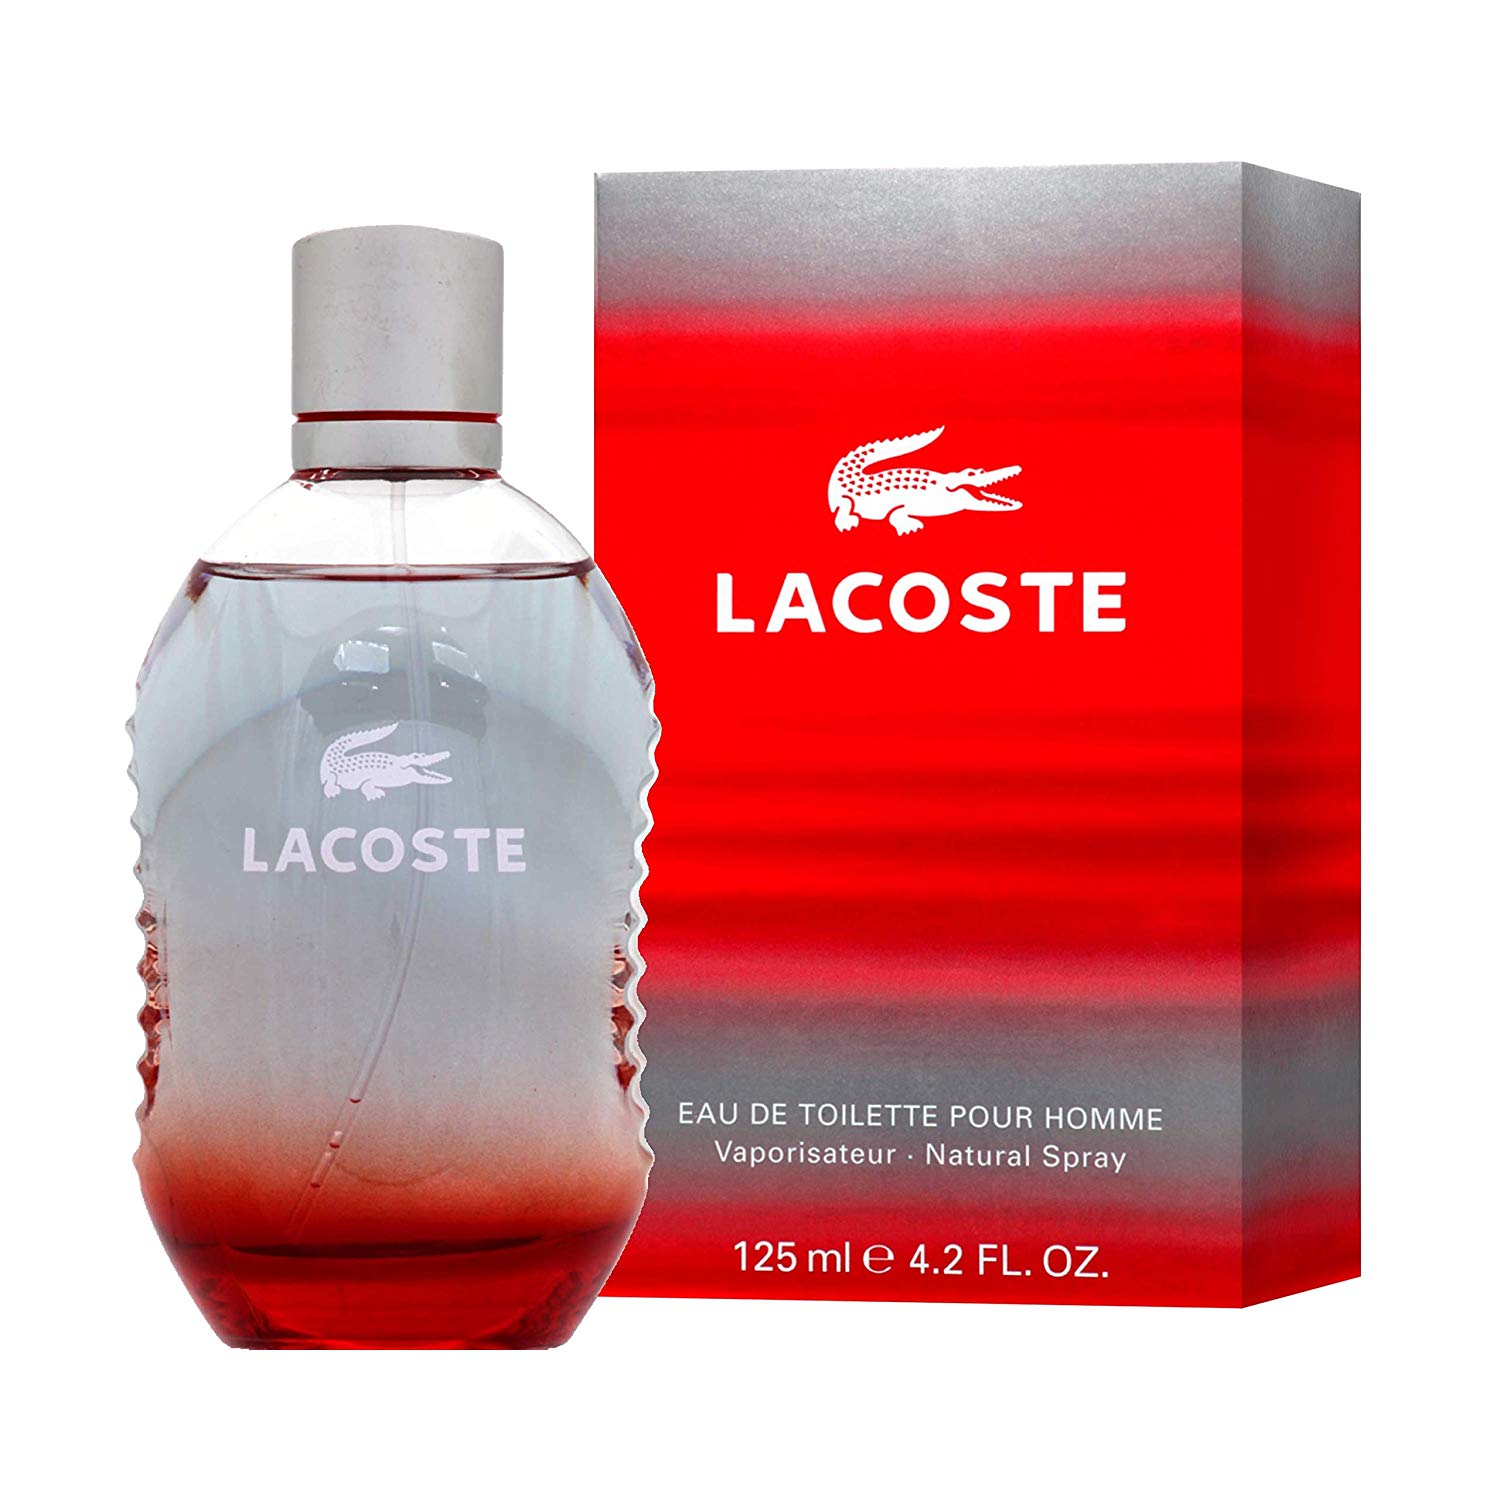 lacoste play